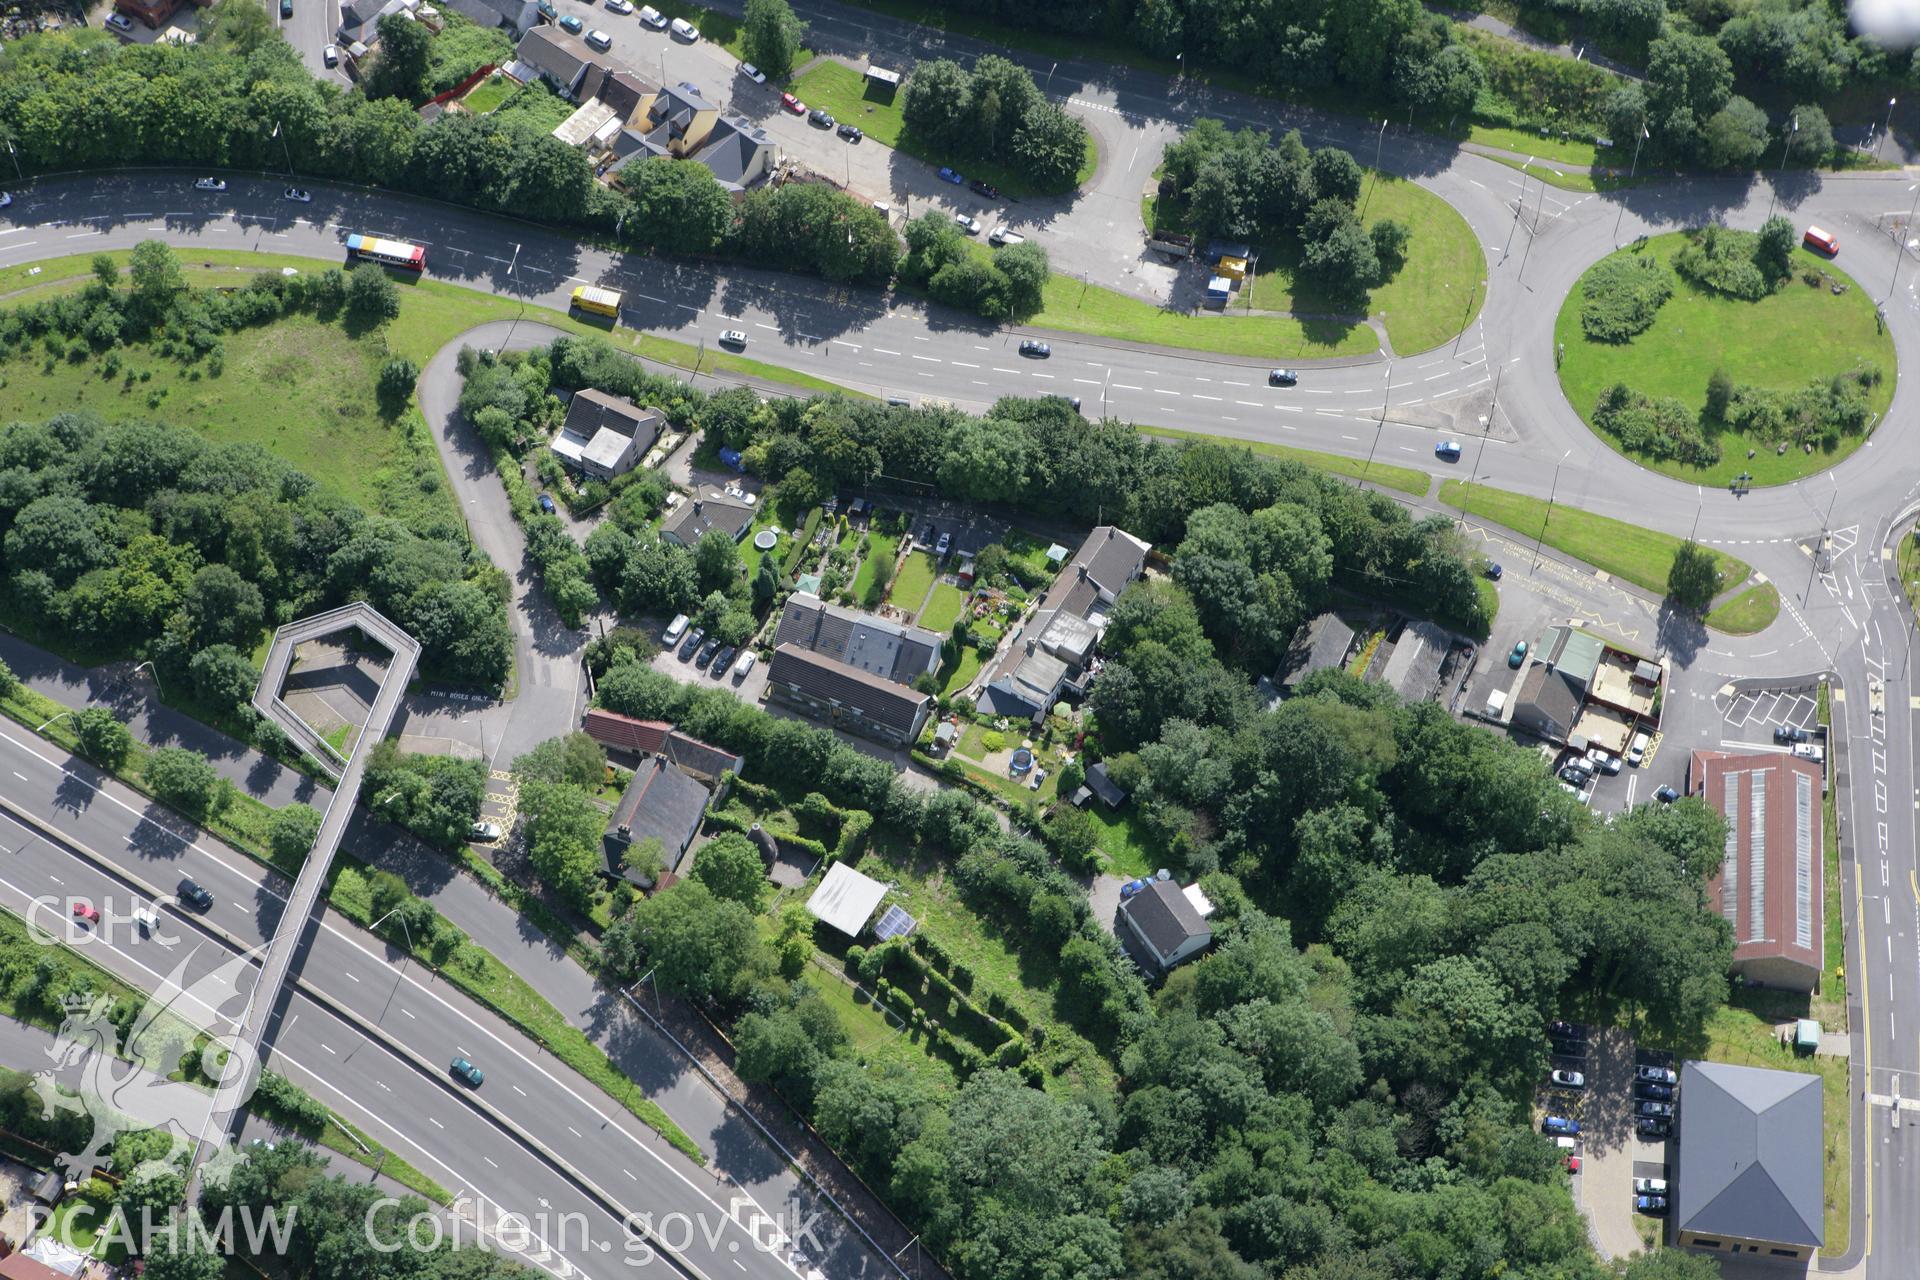 RCAHMW colour oblique aerial photograph of Nantgarw Pottery, Taff's Well. Taken on 30 July 2007 by Toby Driver